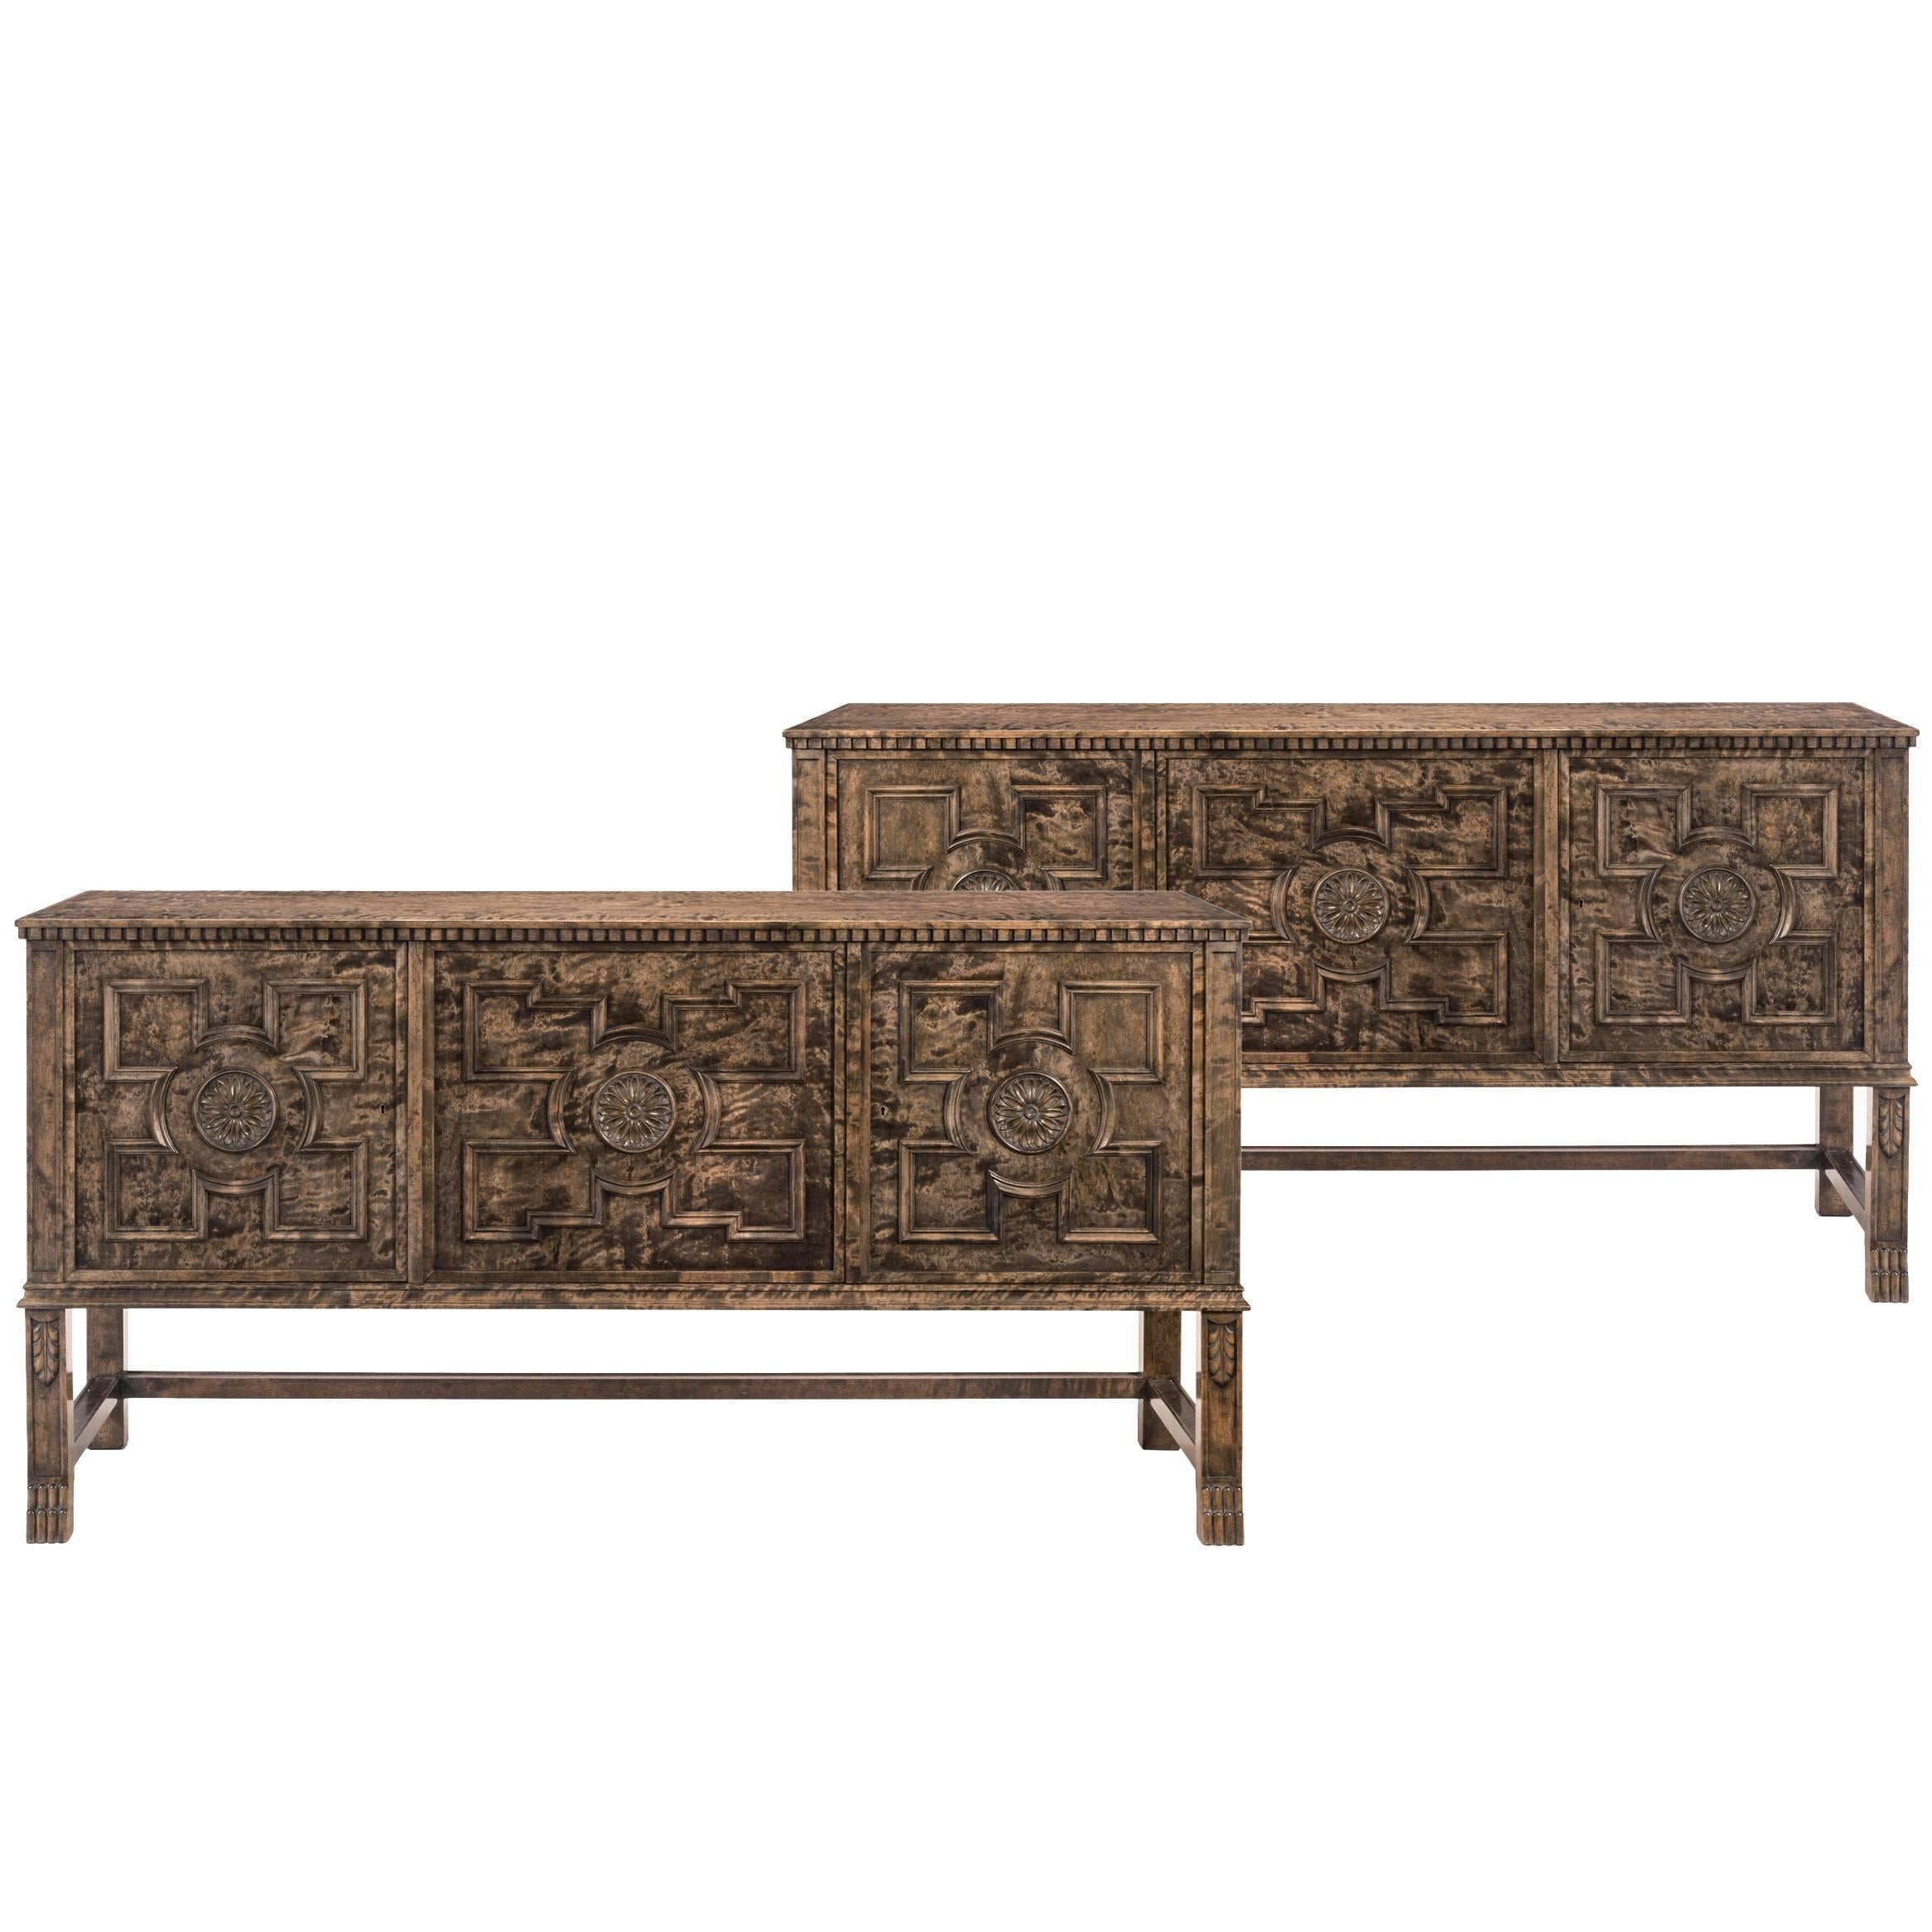 Axel Einar Hjorth for Bodafors, Pair of "Roma" Quilted Birch Sideboard Cabinets For Sale